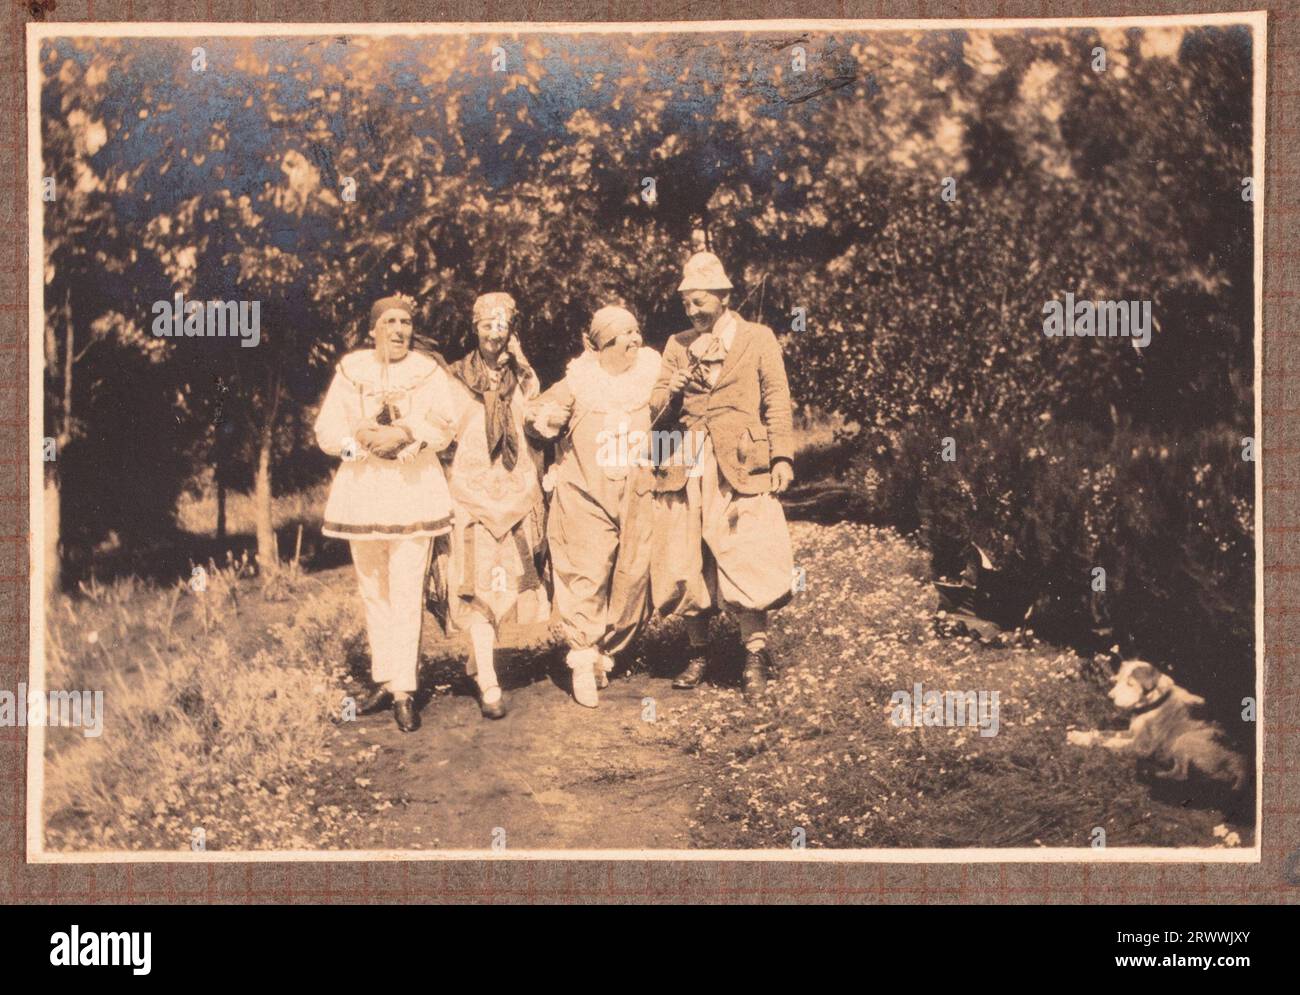 One of a series of photographs showing the Bungeys with friends on a picnic. May Bungey sits with a group of Europeans, including adults and children, in the shade of a tree surrounded by undergrowth. The children are sitting in branches above their heads. Original page caption: Picnic to 'Wamie Hill' Feb: 1927, on Kapiti Plains. Stock Photo